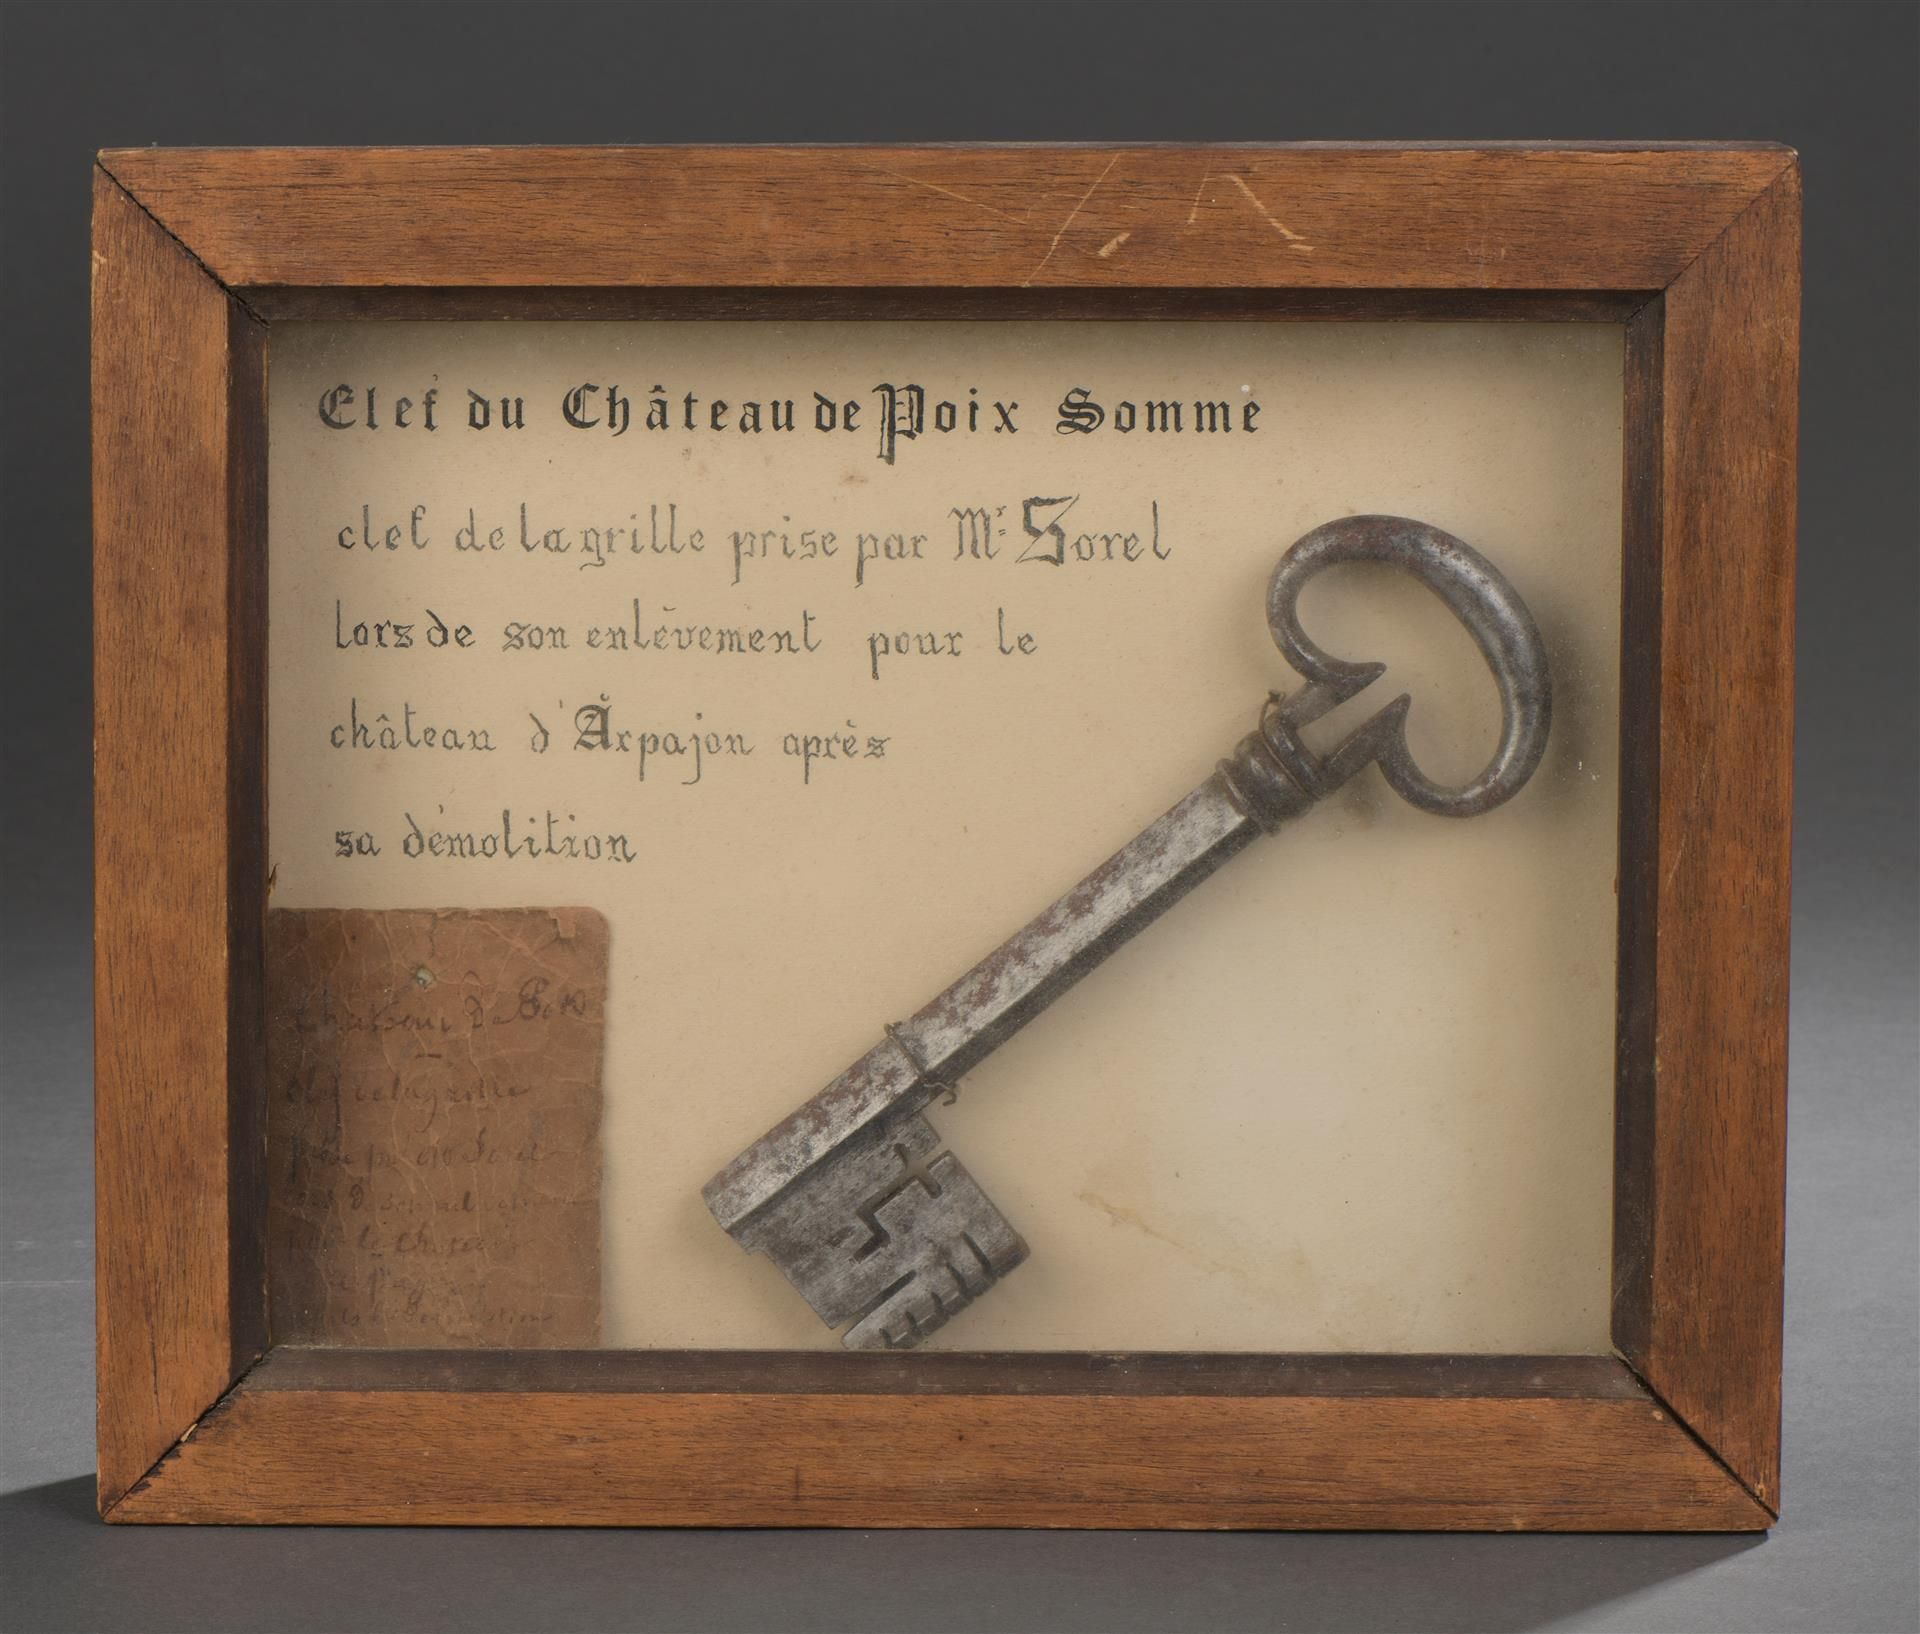 Null Steel key from the castle of Poix, 18th century

In a frame with handwritte&hellip;